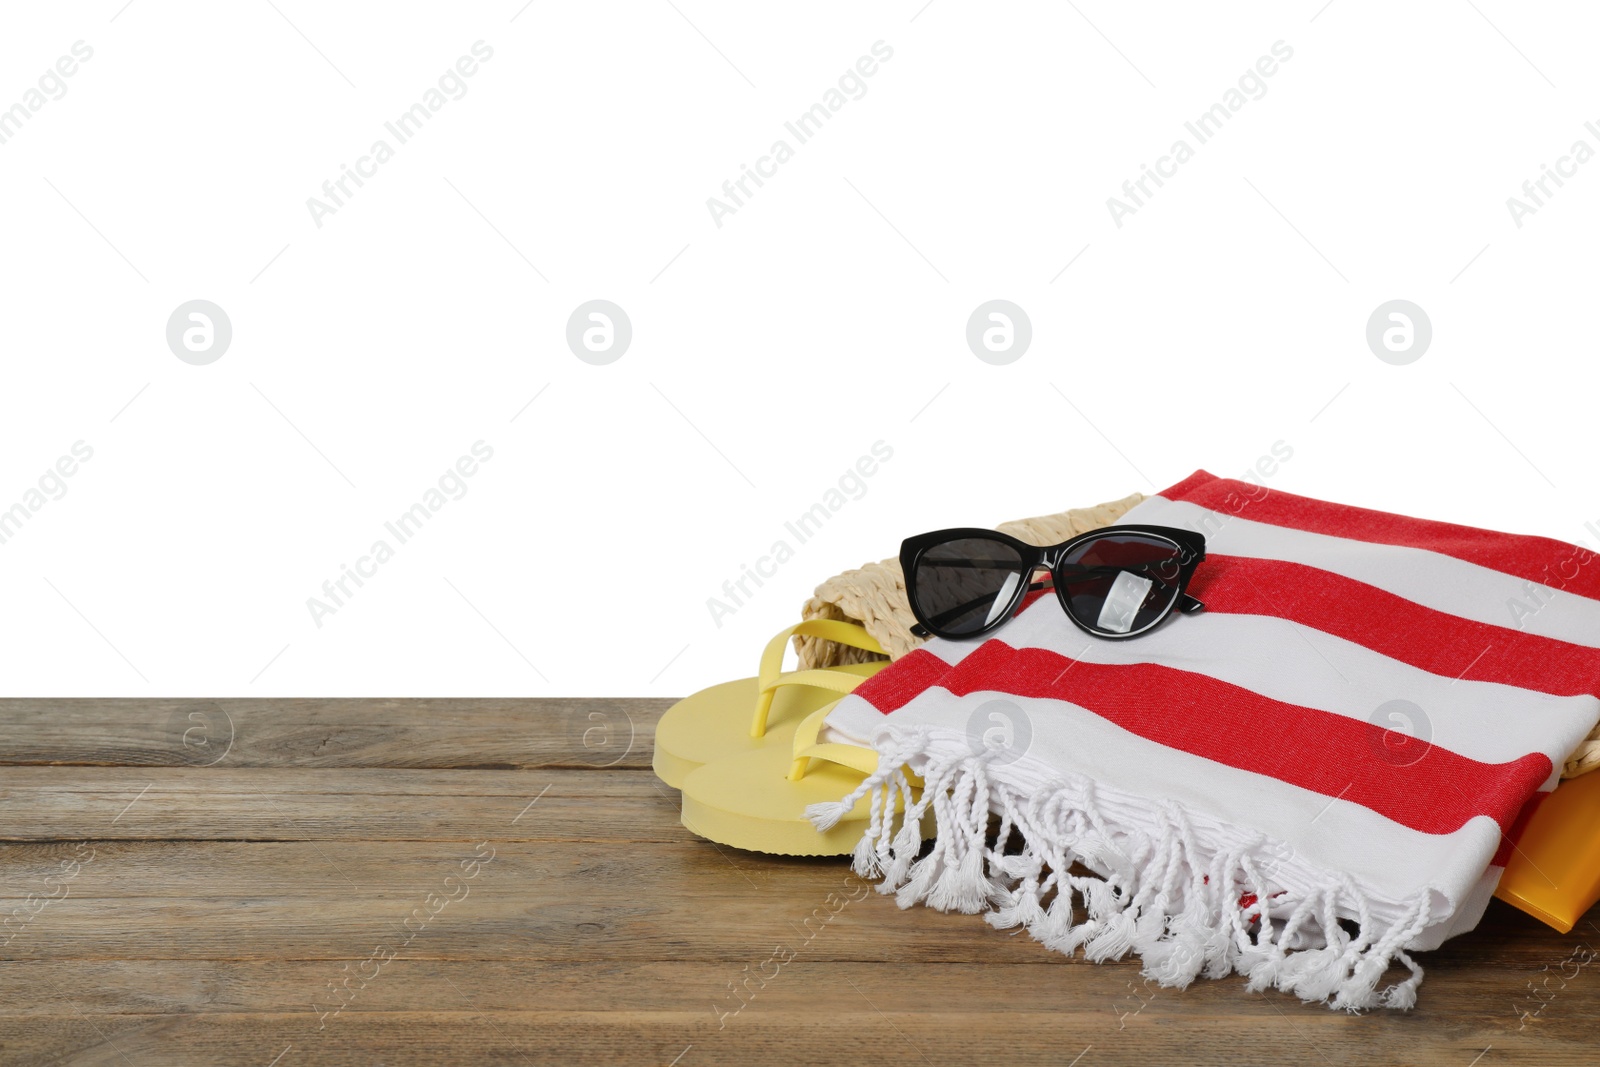 Photo of Beach bag with towel, flip flops and sunglasses on wooden surface against white background. Space for text